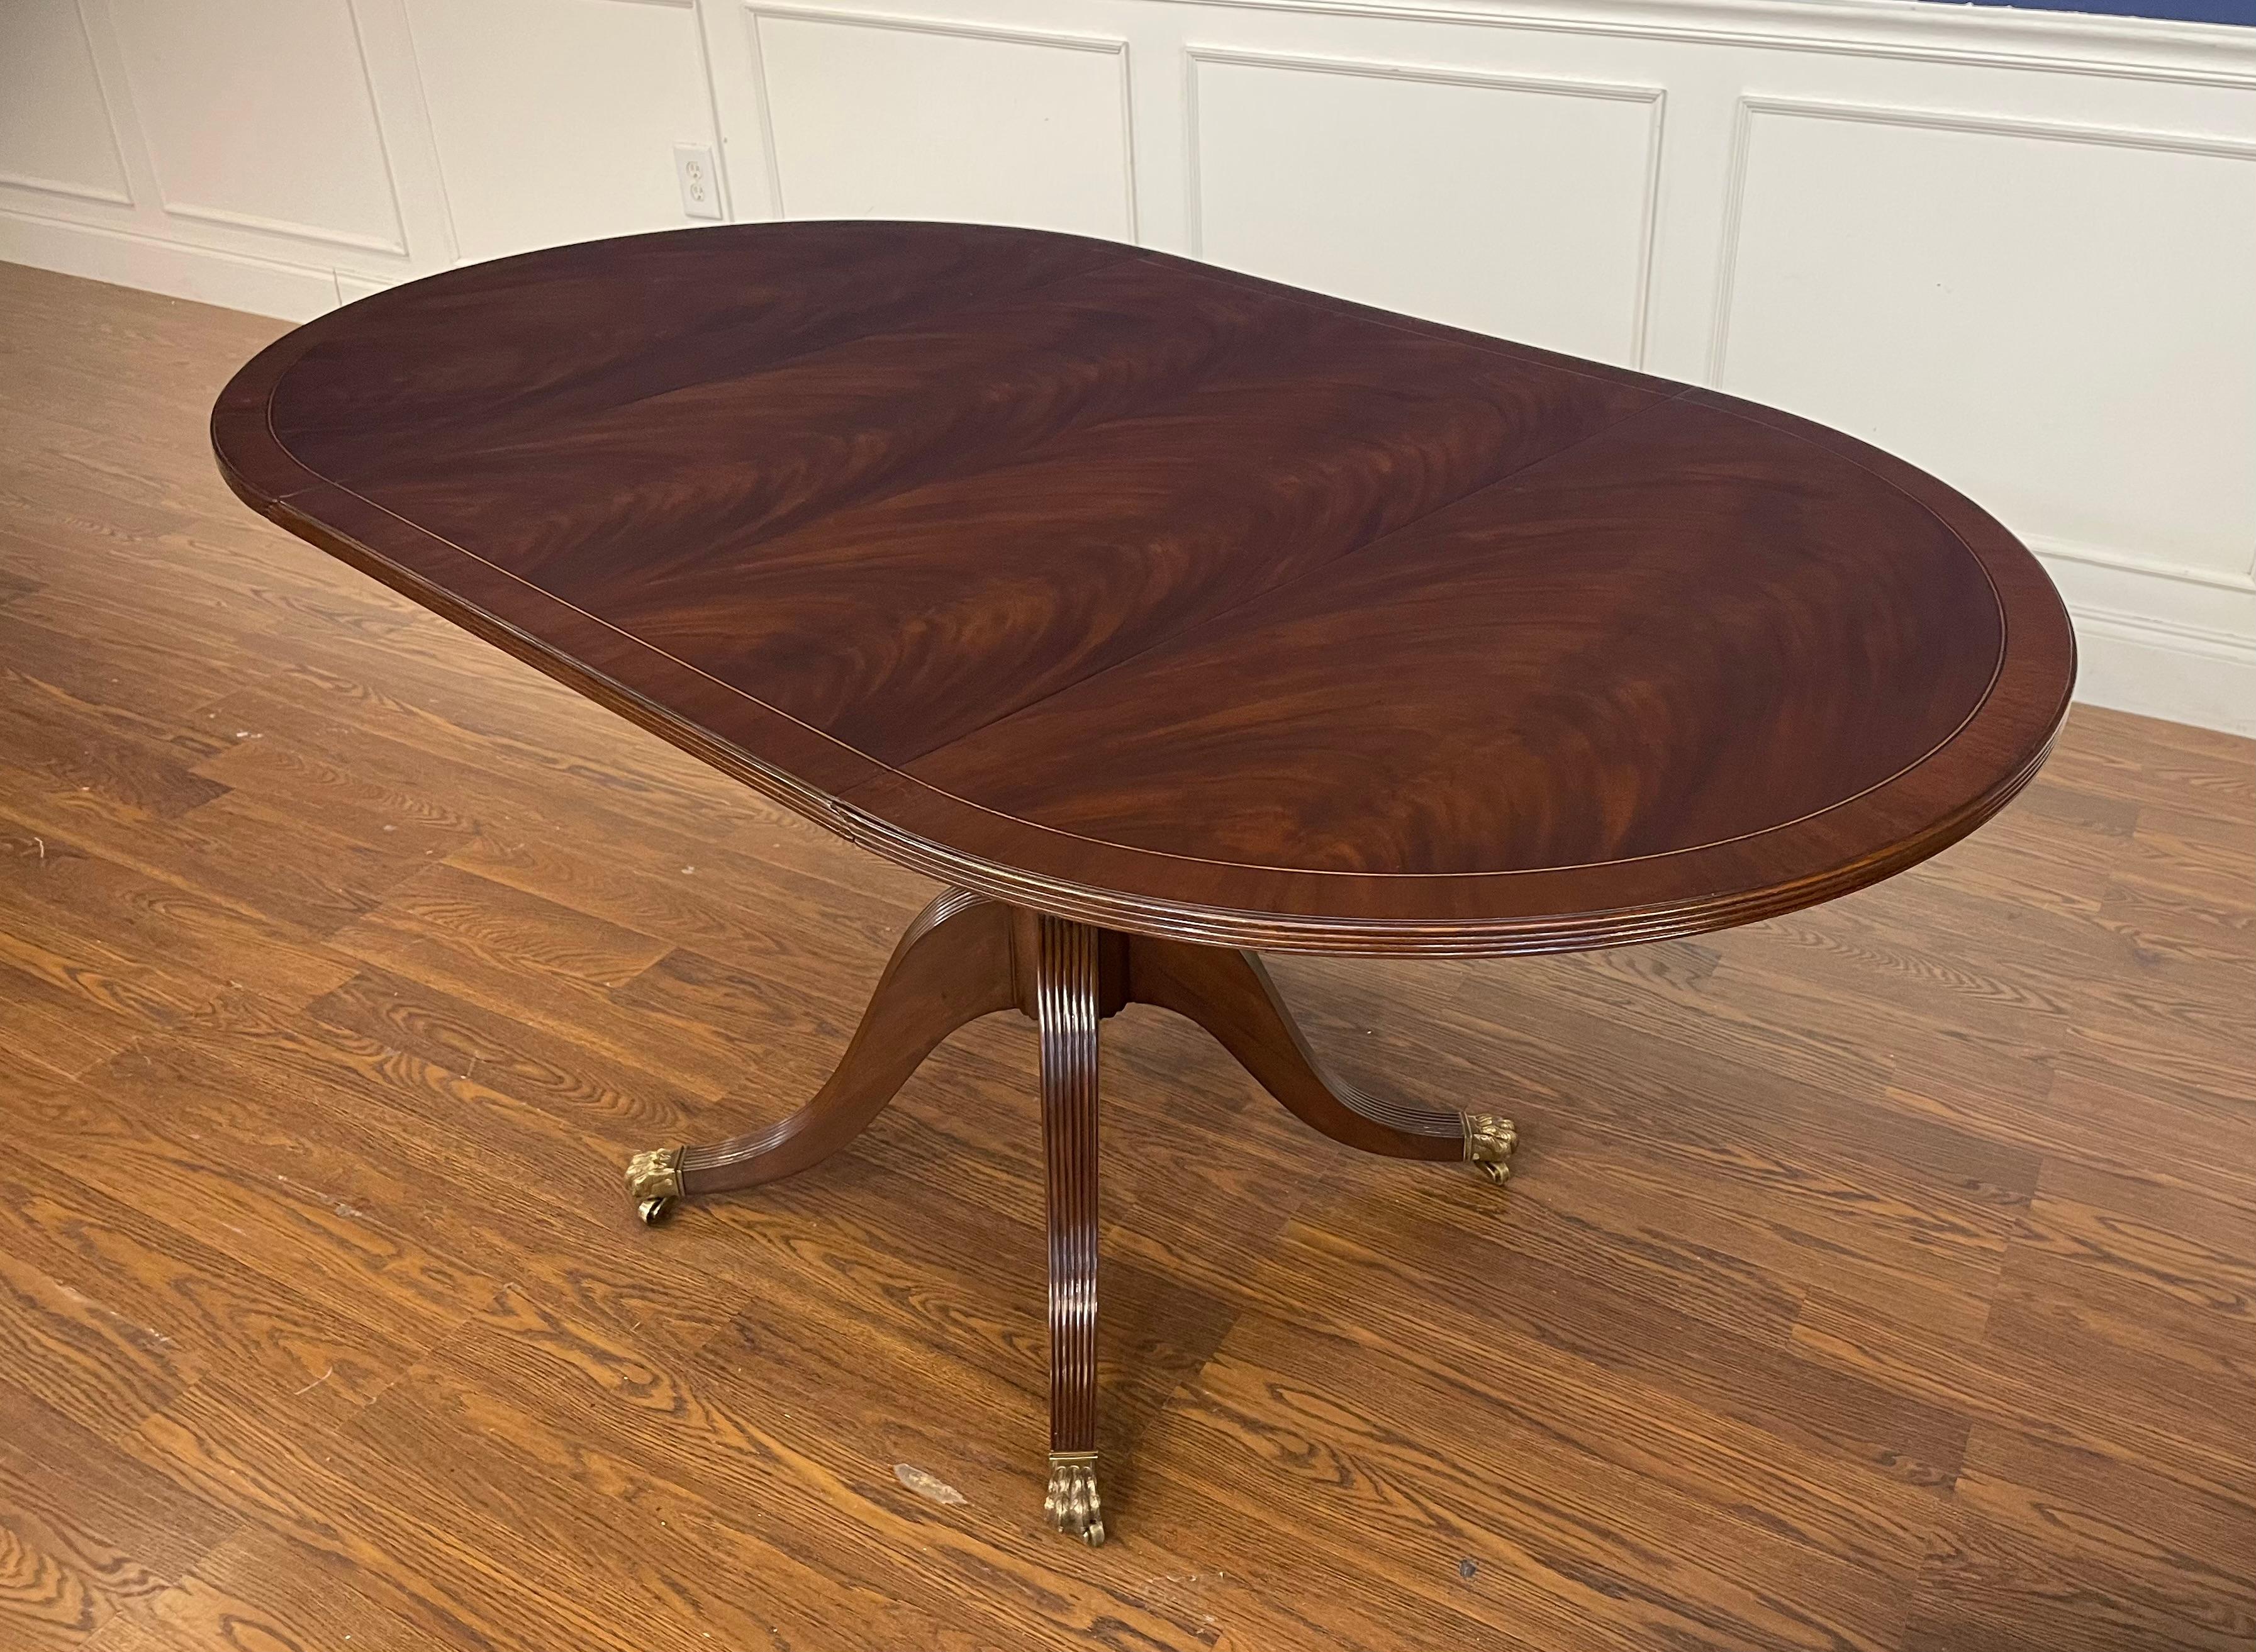 This is a mahogany pedestal table with fold down leaves.  It can have multiple uses around the home including serving as a small dining table, breakfast table or game table.  It has a swirly crotch mahogany top and a four leg pedestal with solid